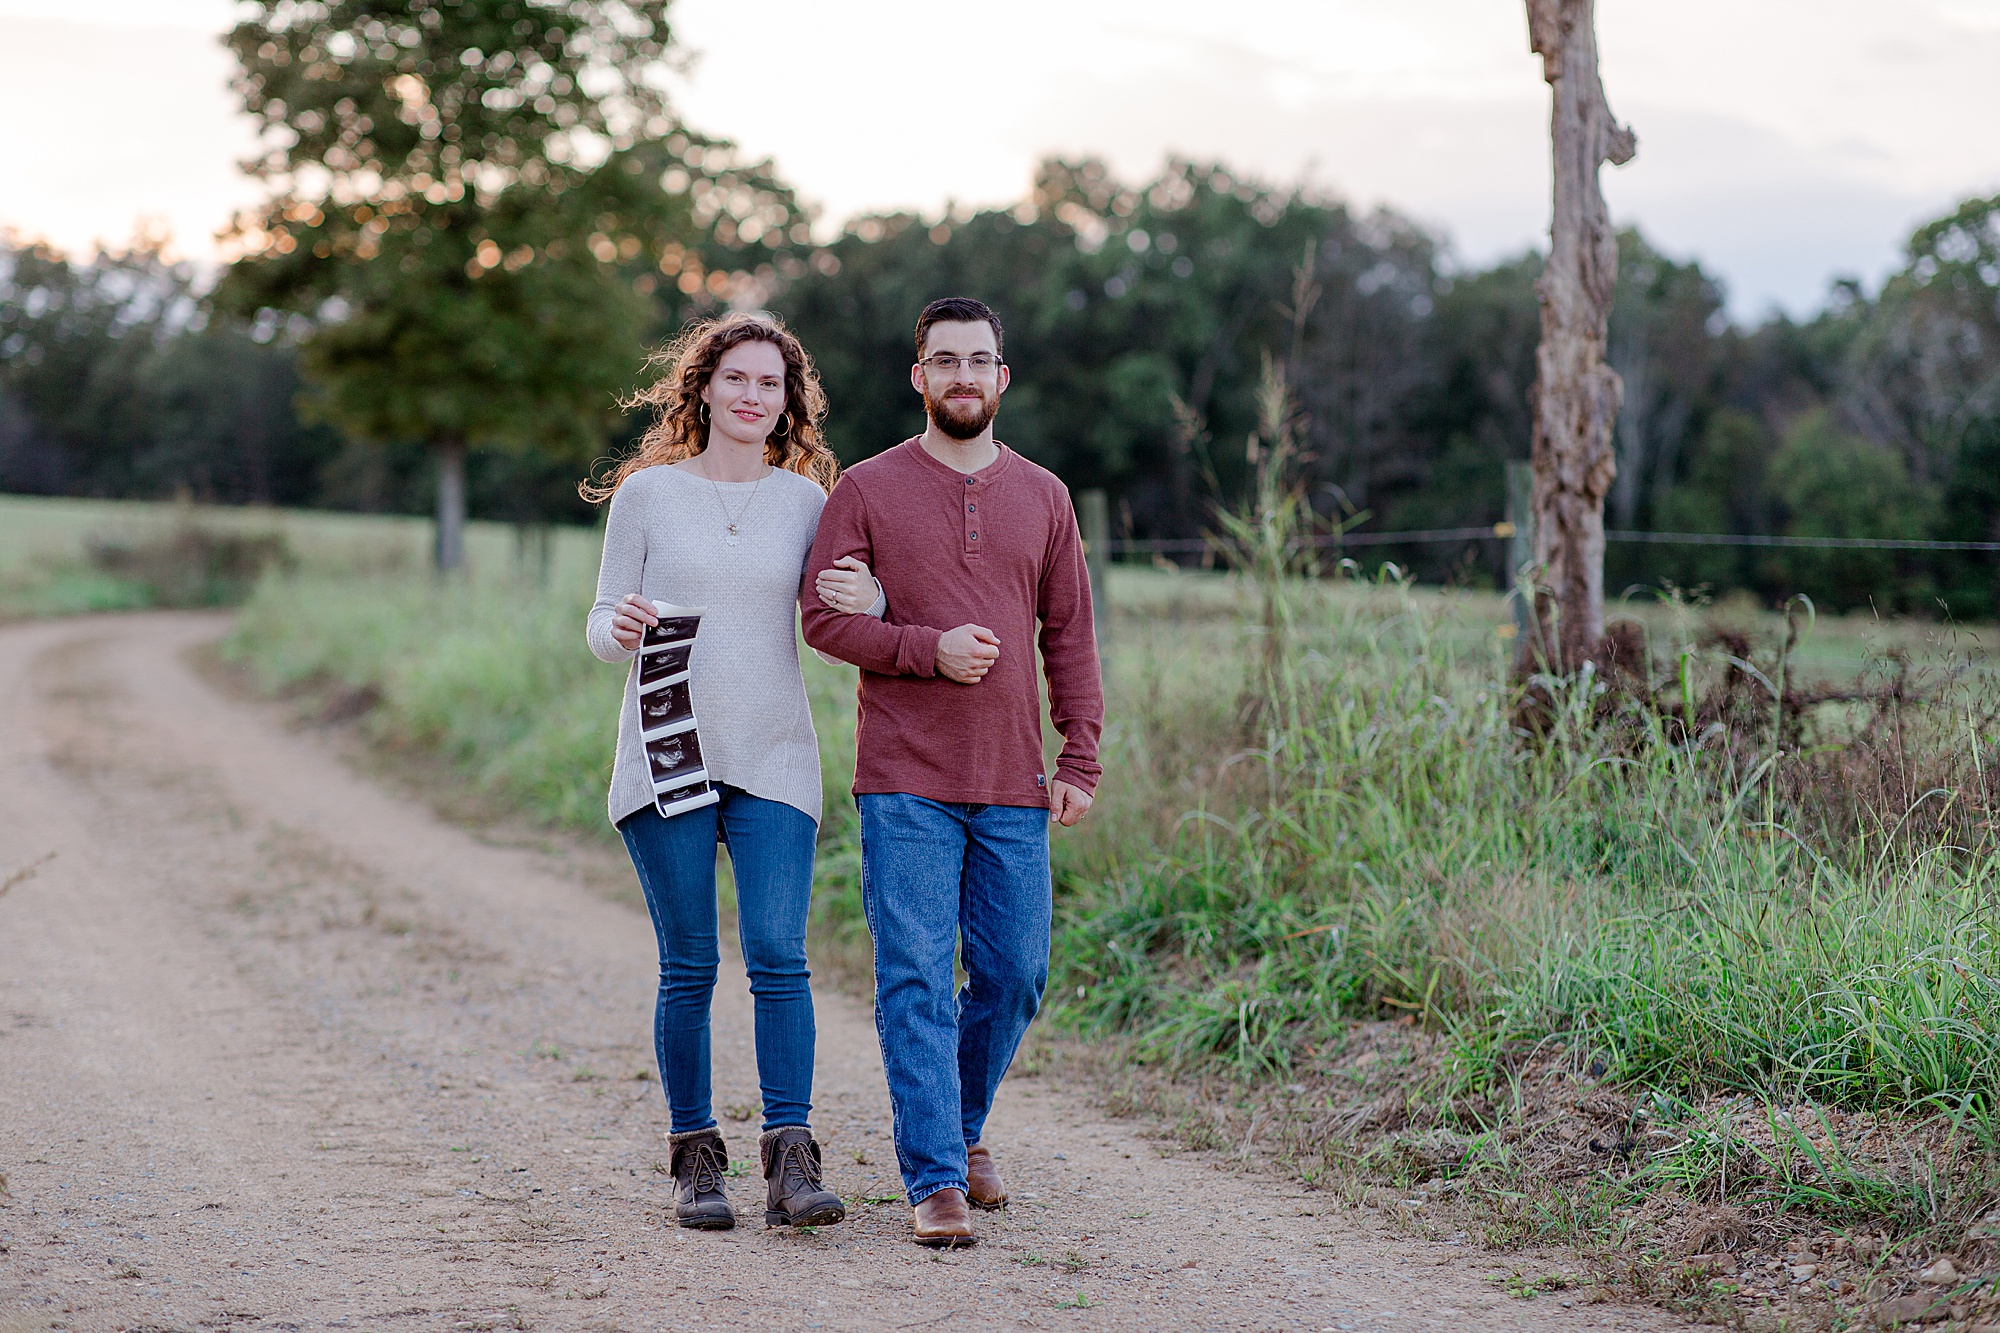 couple walks together showing off sonogram during photos for pregnant announcement 